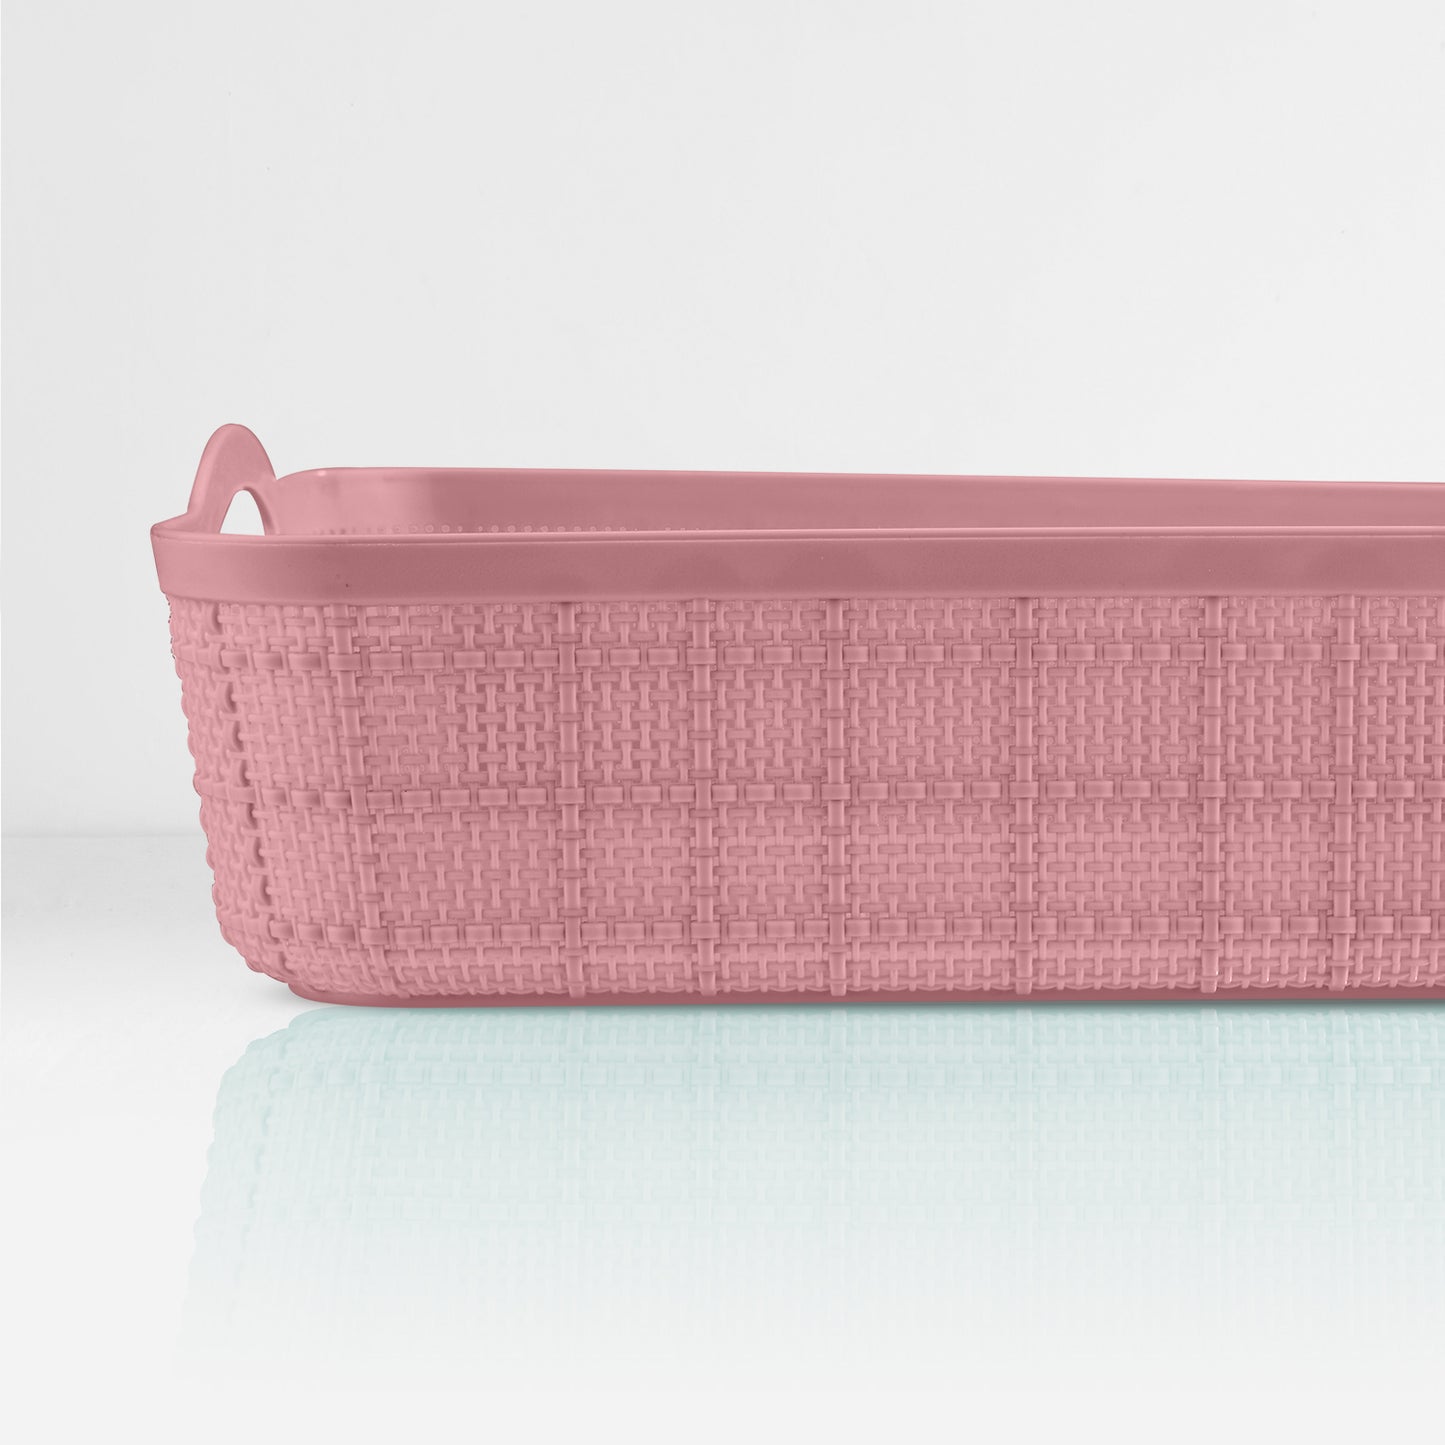 Keeper Tray | Set of 3 | Pink